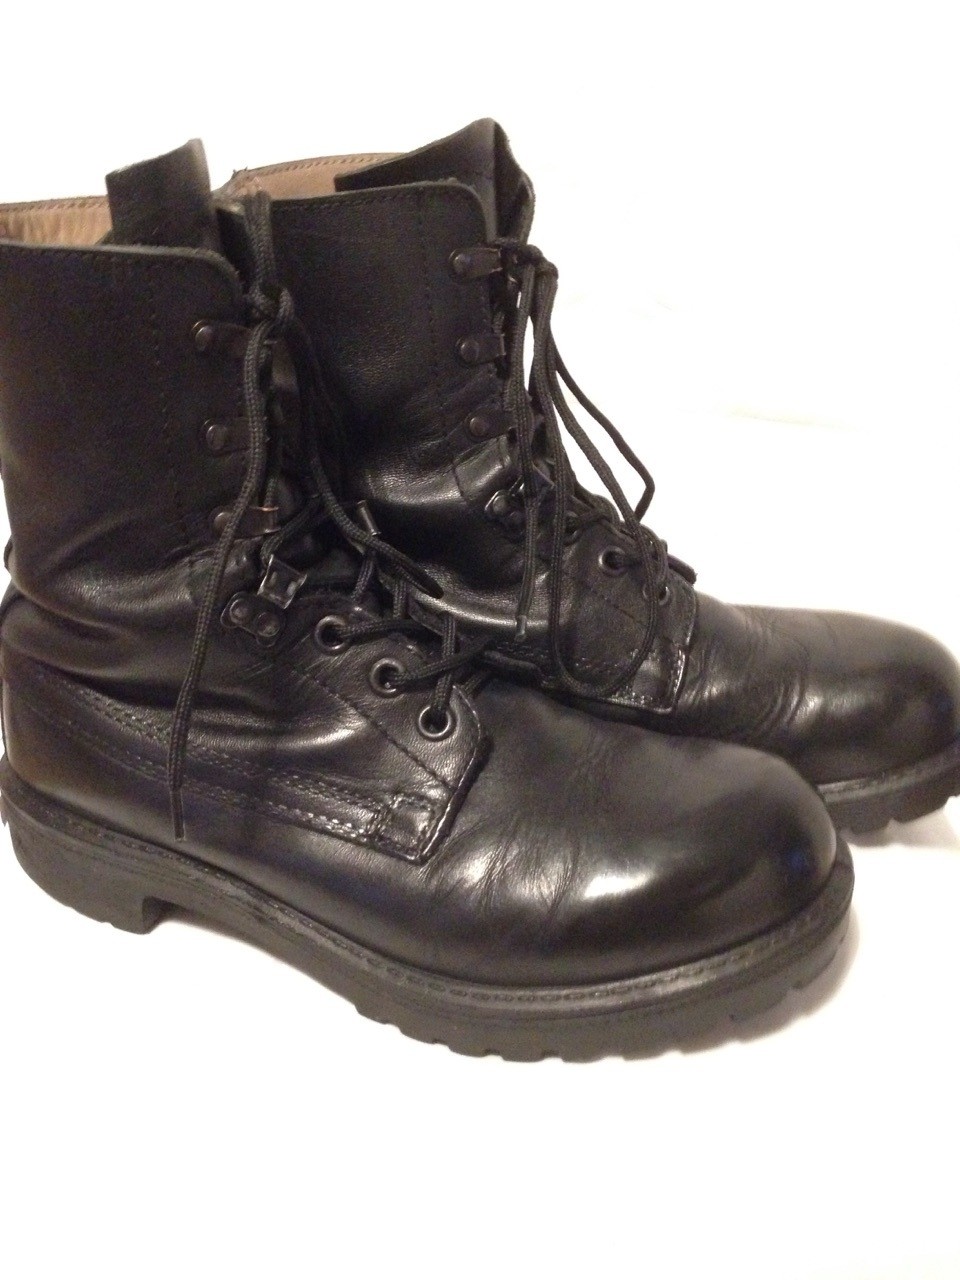 British Army Assault Boots Size 7M